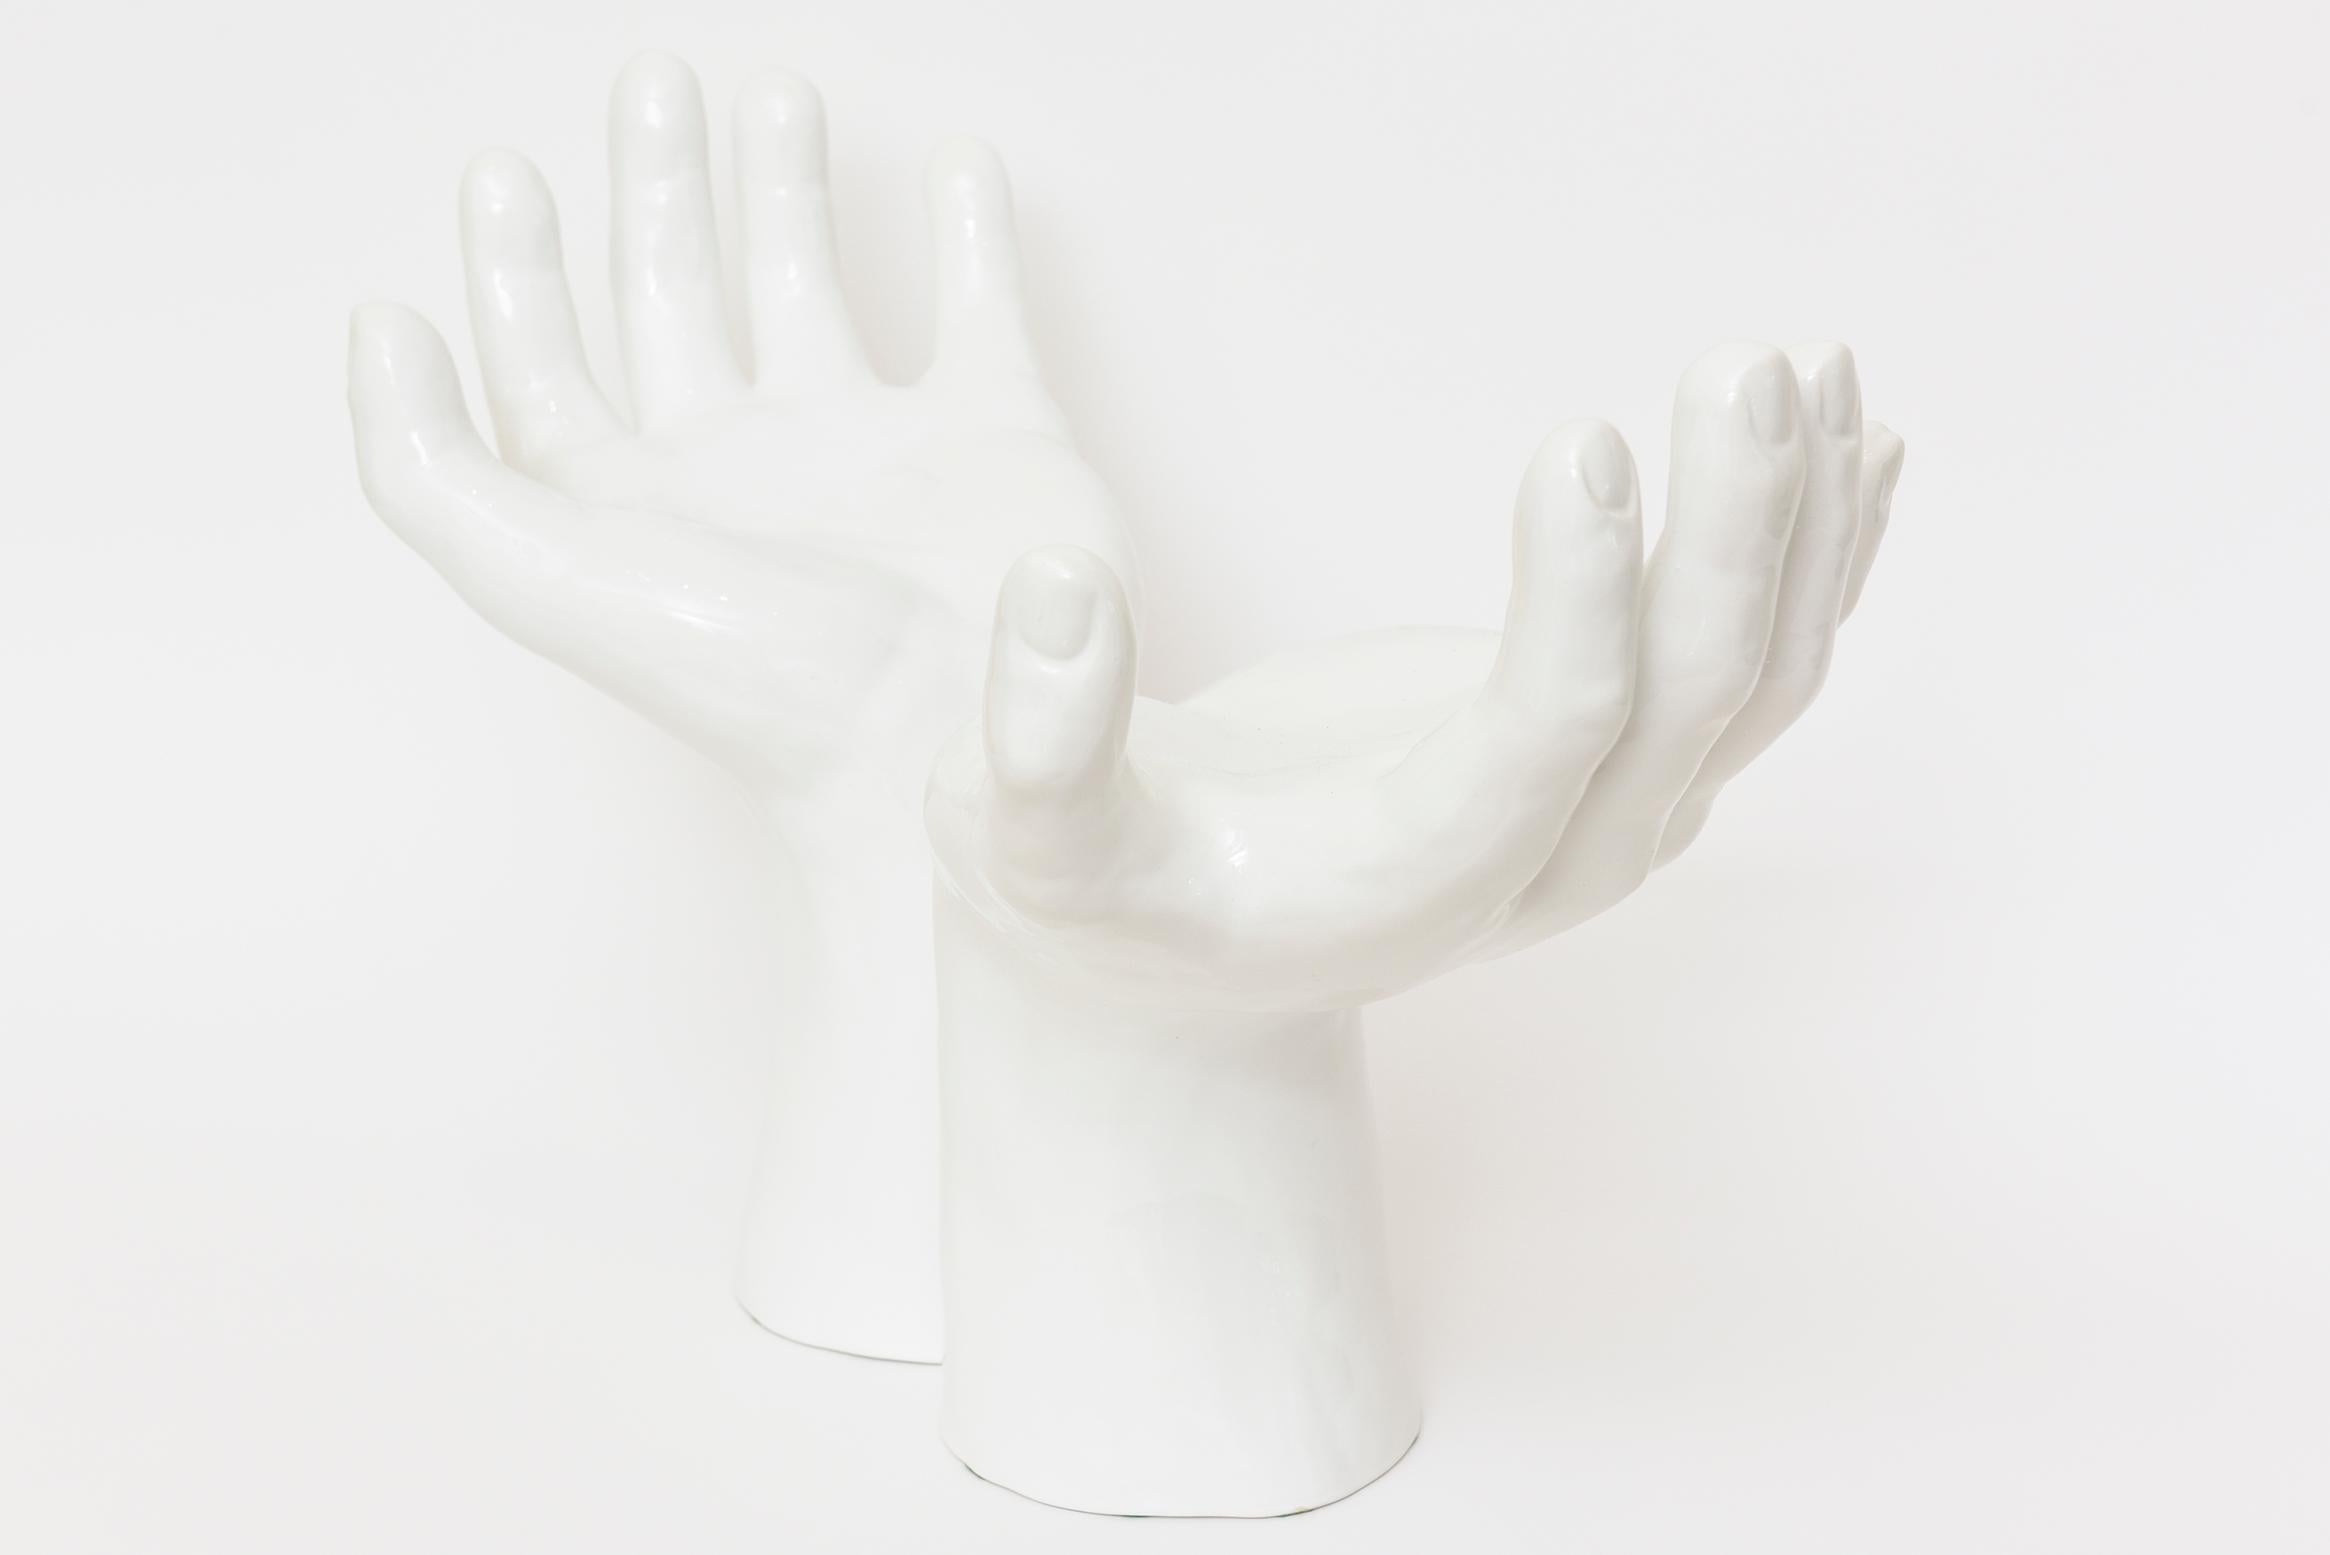 Late 20th Century Italian White Ceramic 2 Part Monumental Hands and Bowl Sculpture Vintage